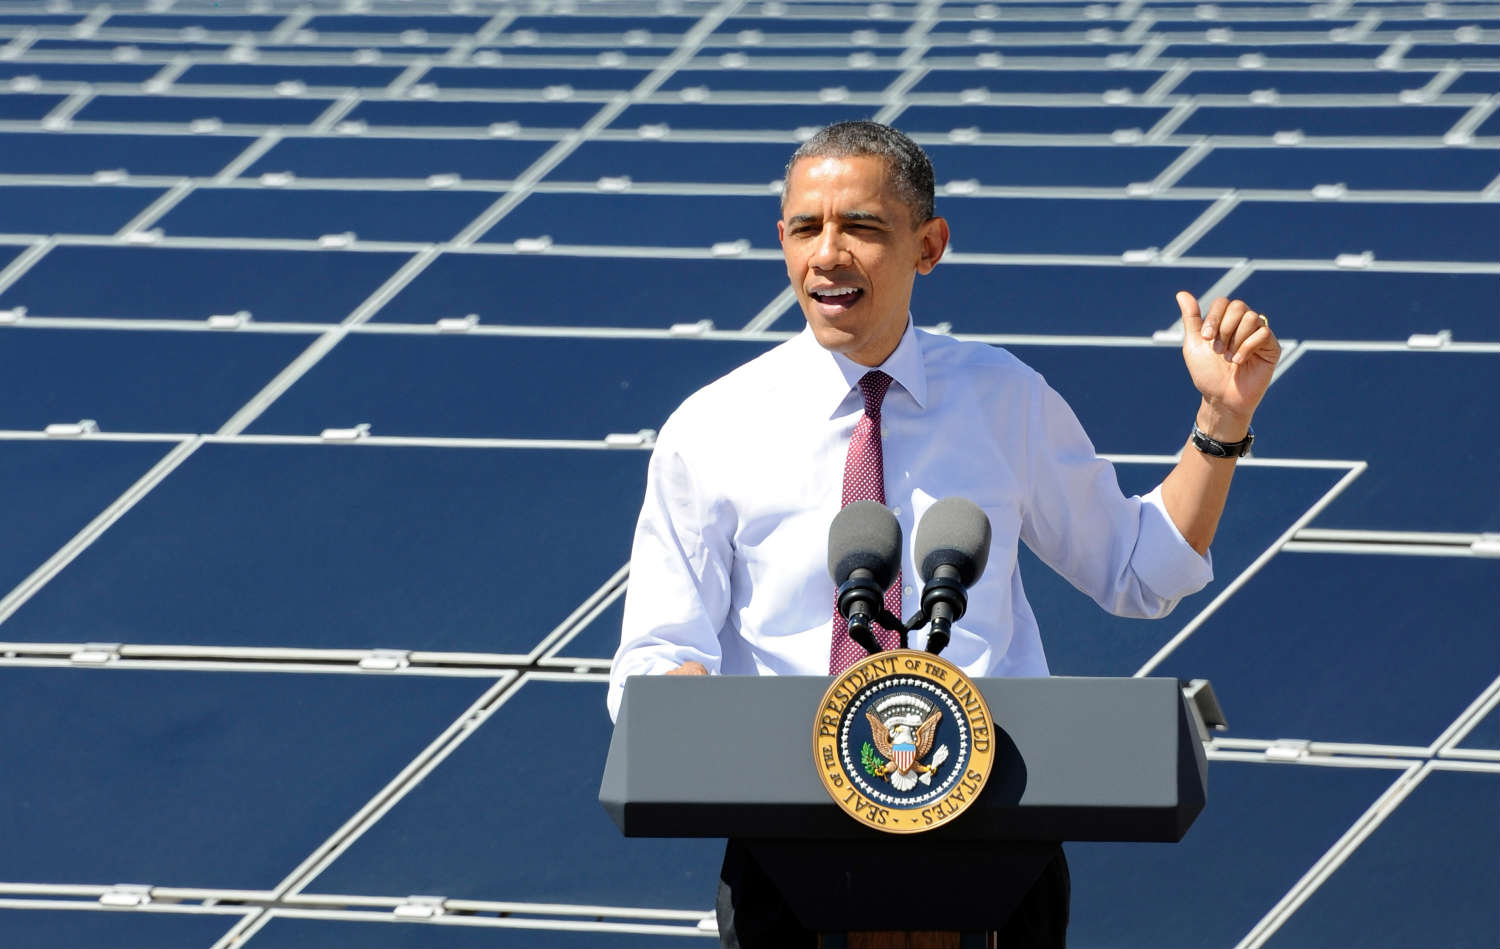 Solar power in the U.S. has grown nearly elevenfold under President Obama's watch (Photo by Ethan Miller/Getty Images)